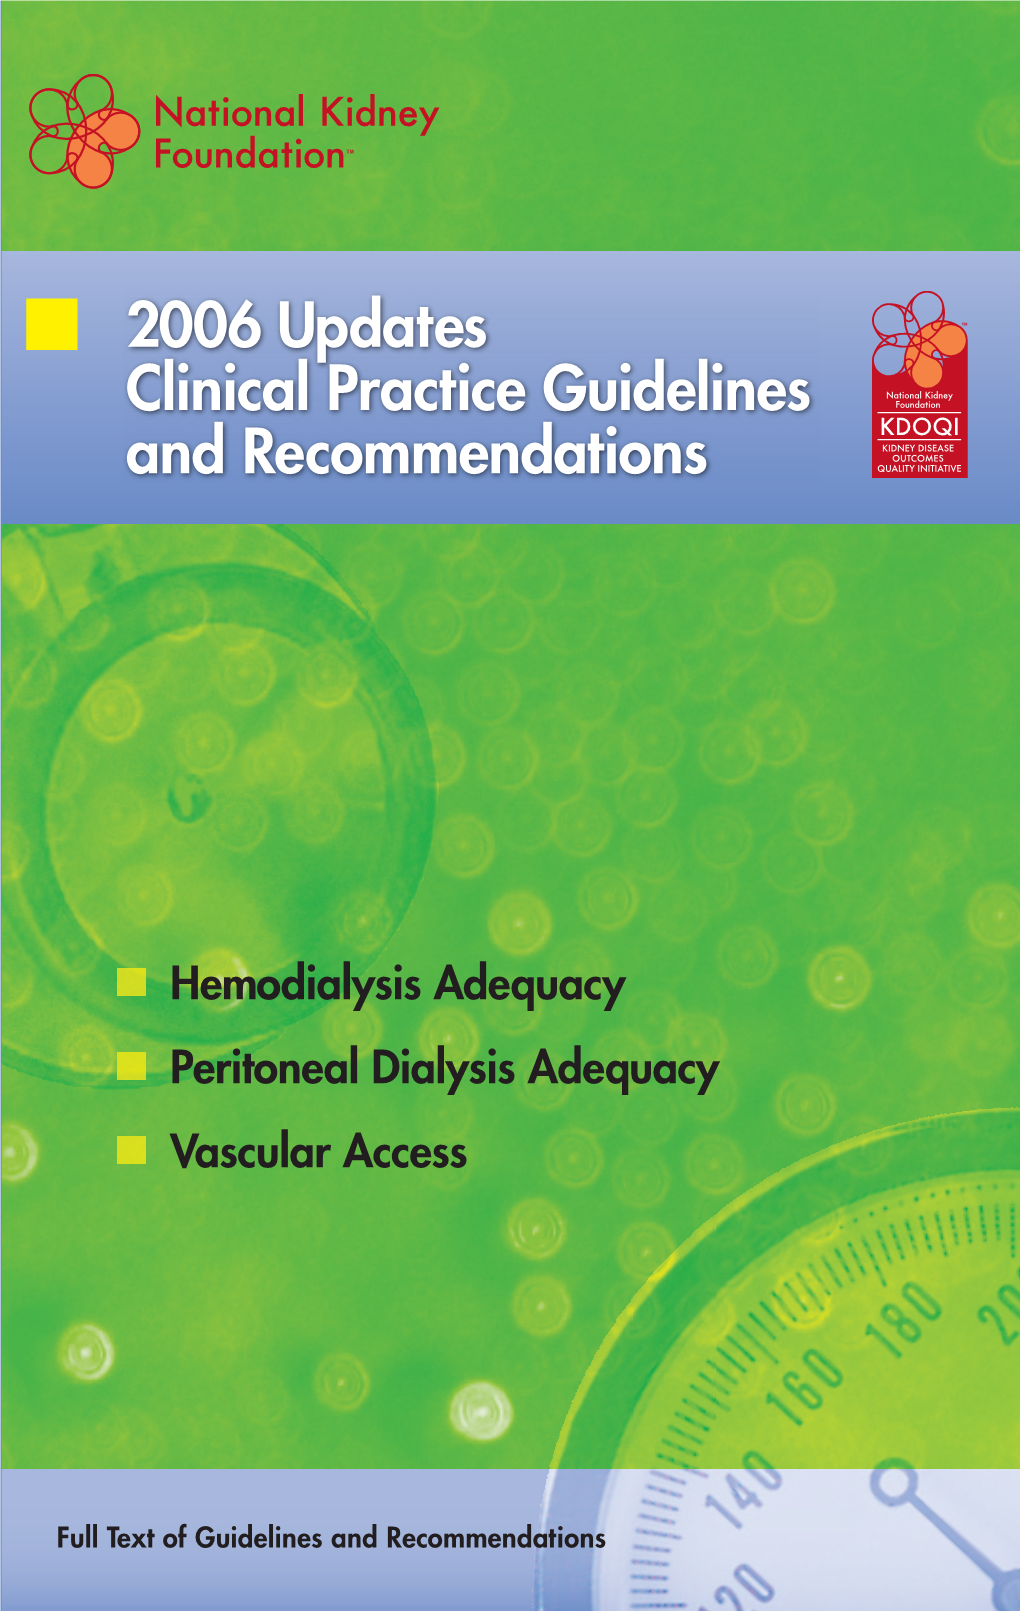 2006 Updates Clinical Practice Guidelines and Recommendations